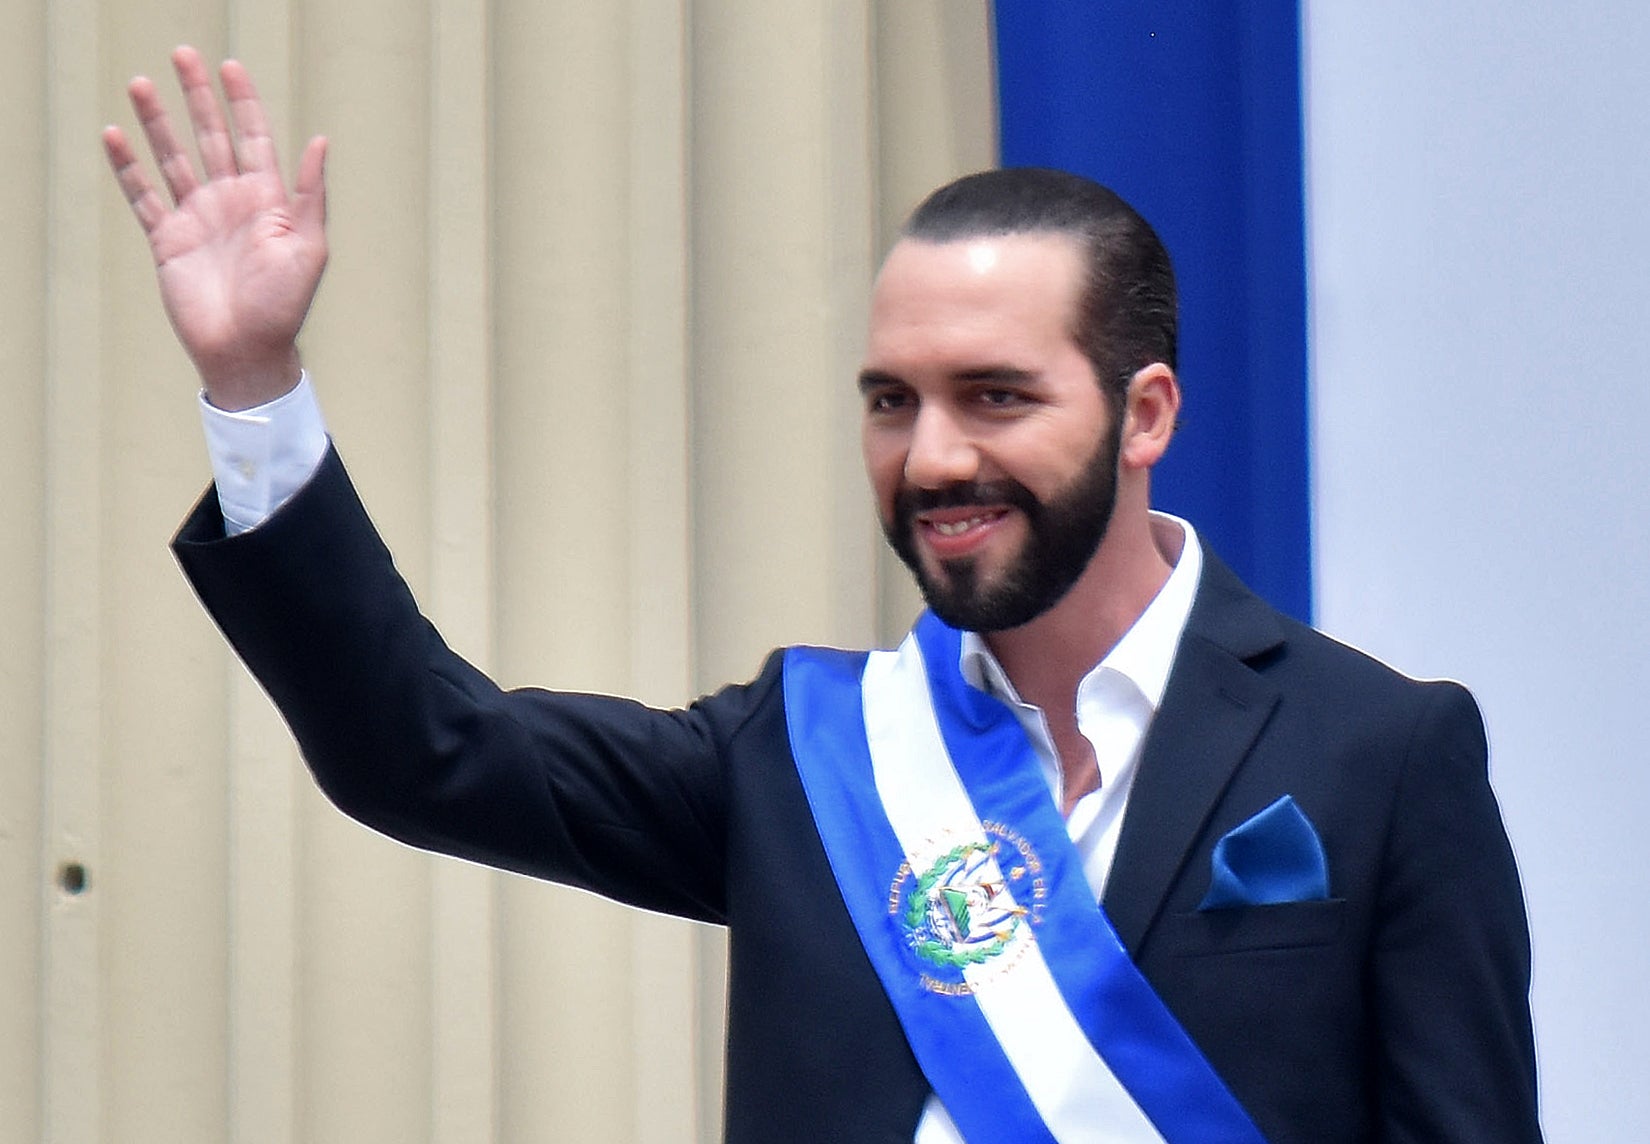 Salvador's president, Nayib Bukele, waves during his inauguration ceremony at Gerardo Barrios Square outside the National Palace in downtown San Salvador, on June 1, 2019. (Photo: Oscar Rivera/AFP, Getty Images)